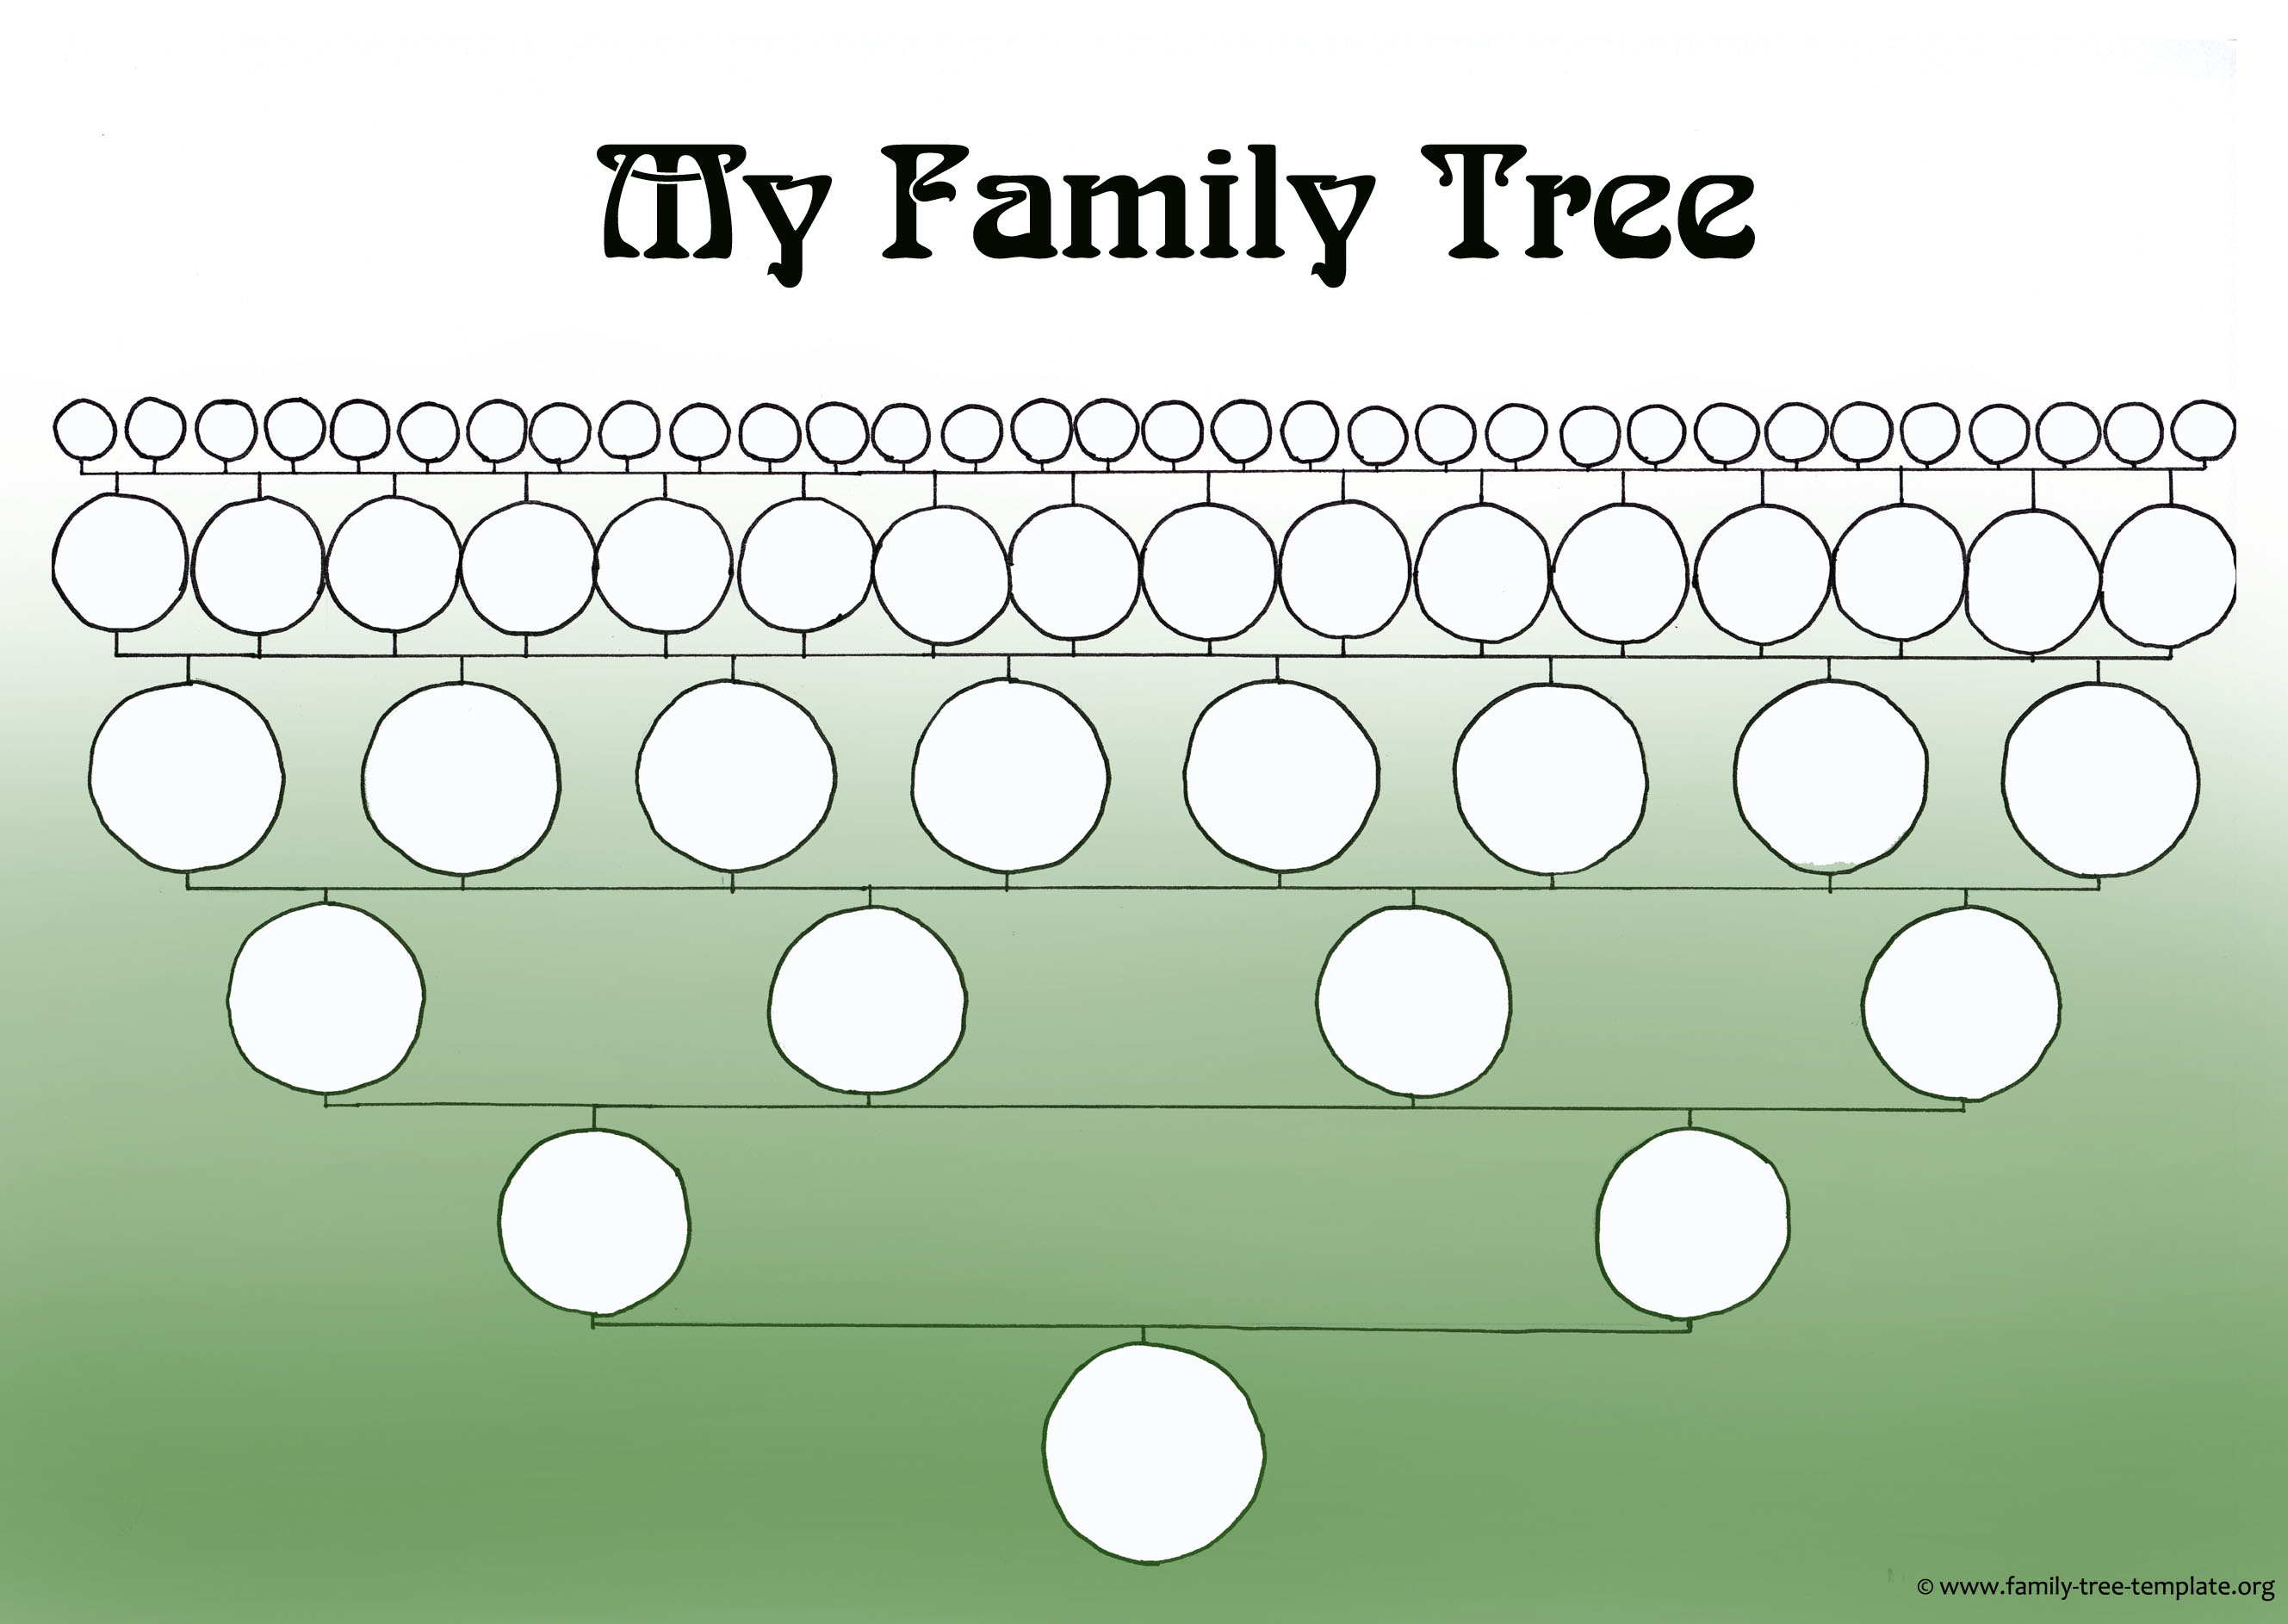 A very simple family tree with circles representing family members.